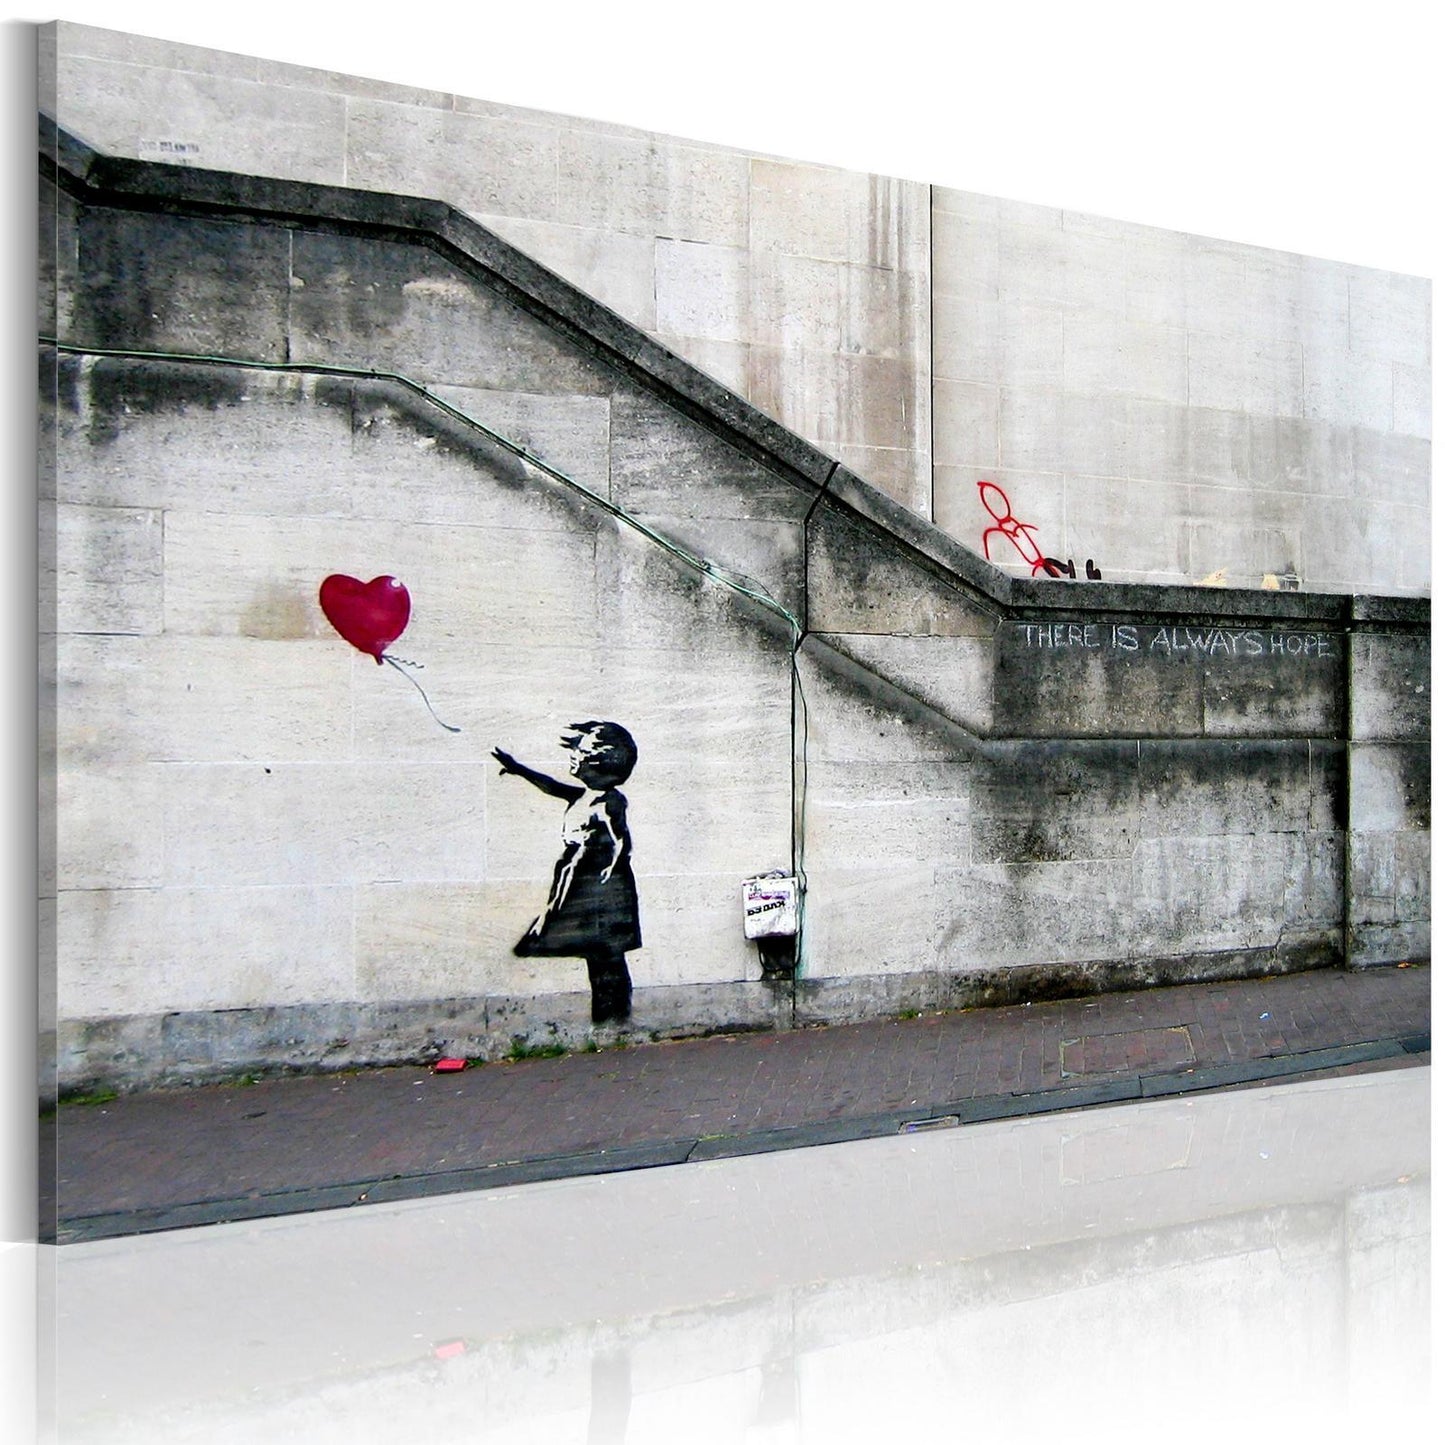 Painting - There is always hope (Banksy)